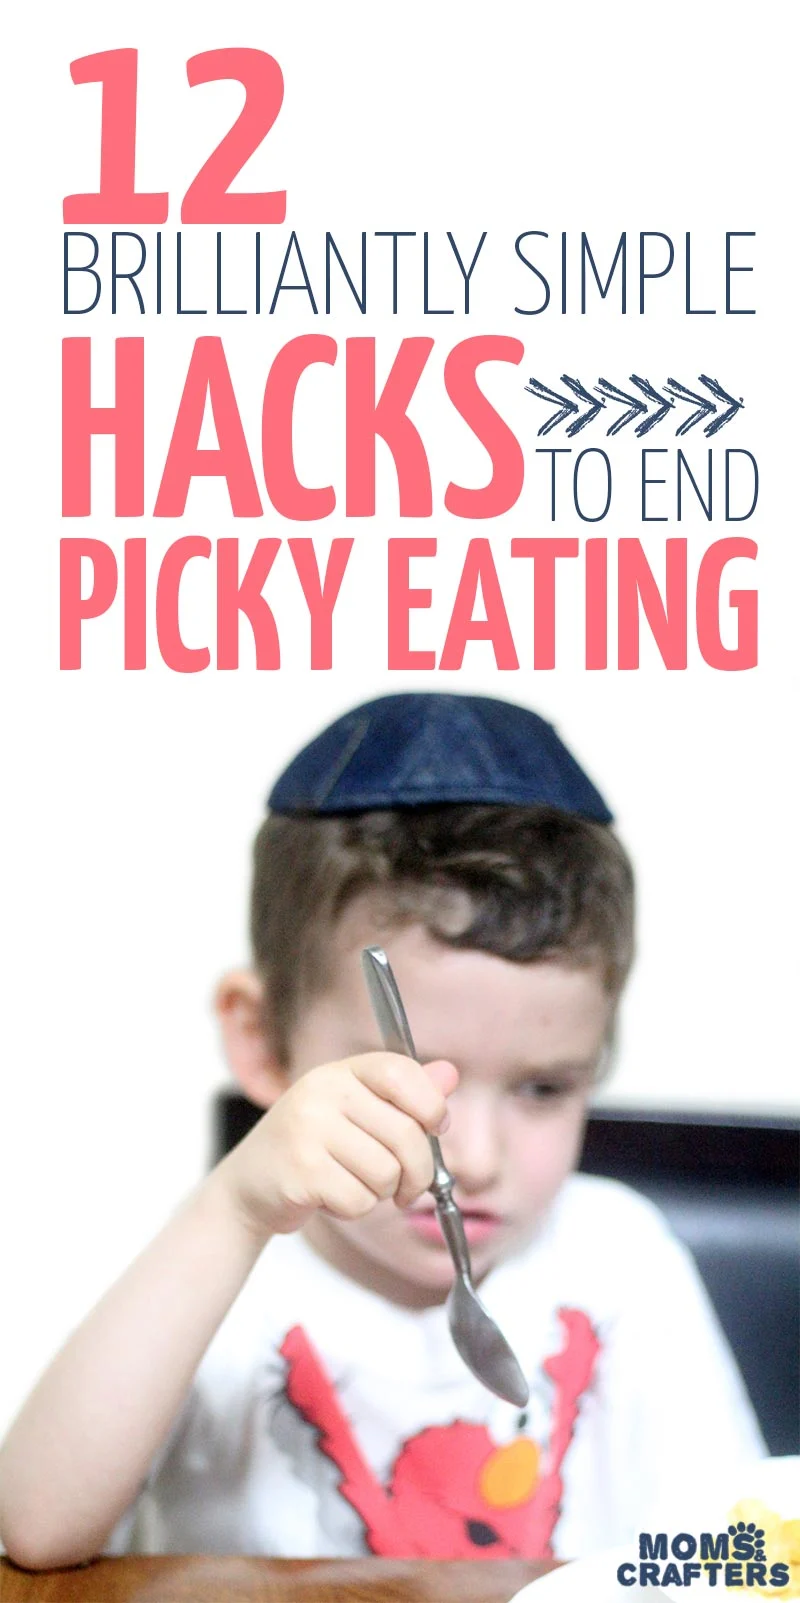 These picky eating tips tricks and hacks are super helpful! They come from a fellow mom and have taken her through her toddler's fussy eating stages. Some great practical parenting tips that are totally positive and gentle ways to get kids to eat healthy foods. 